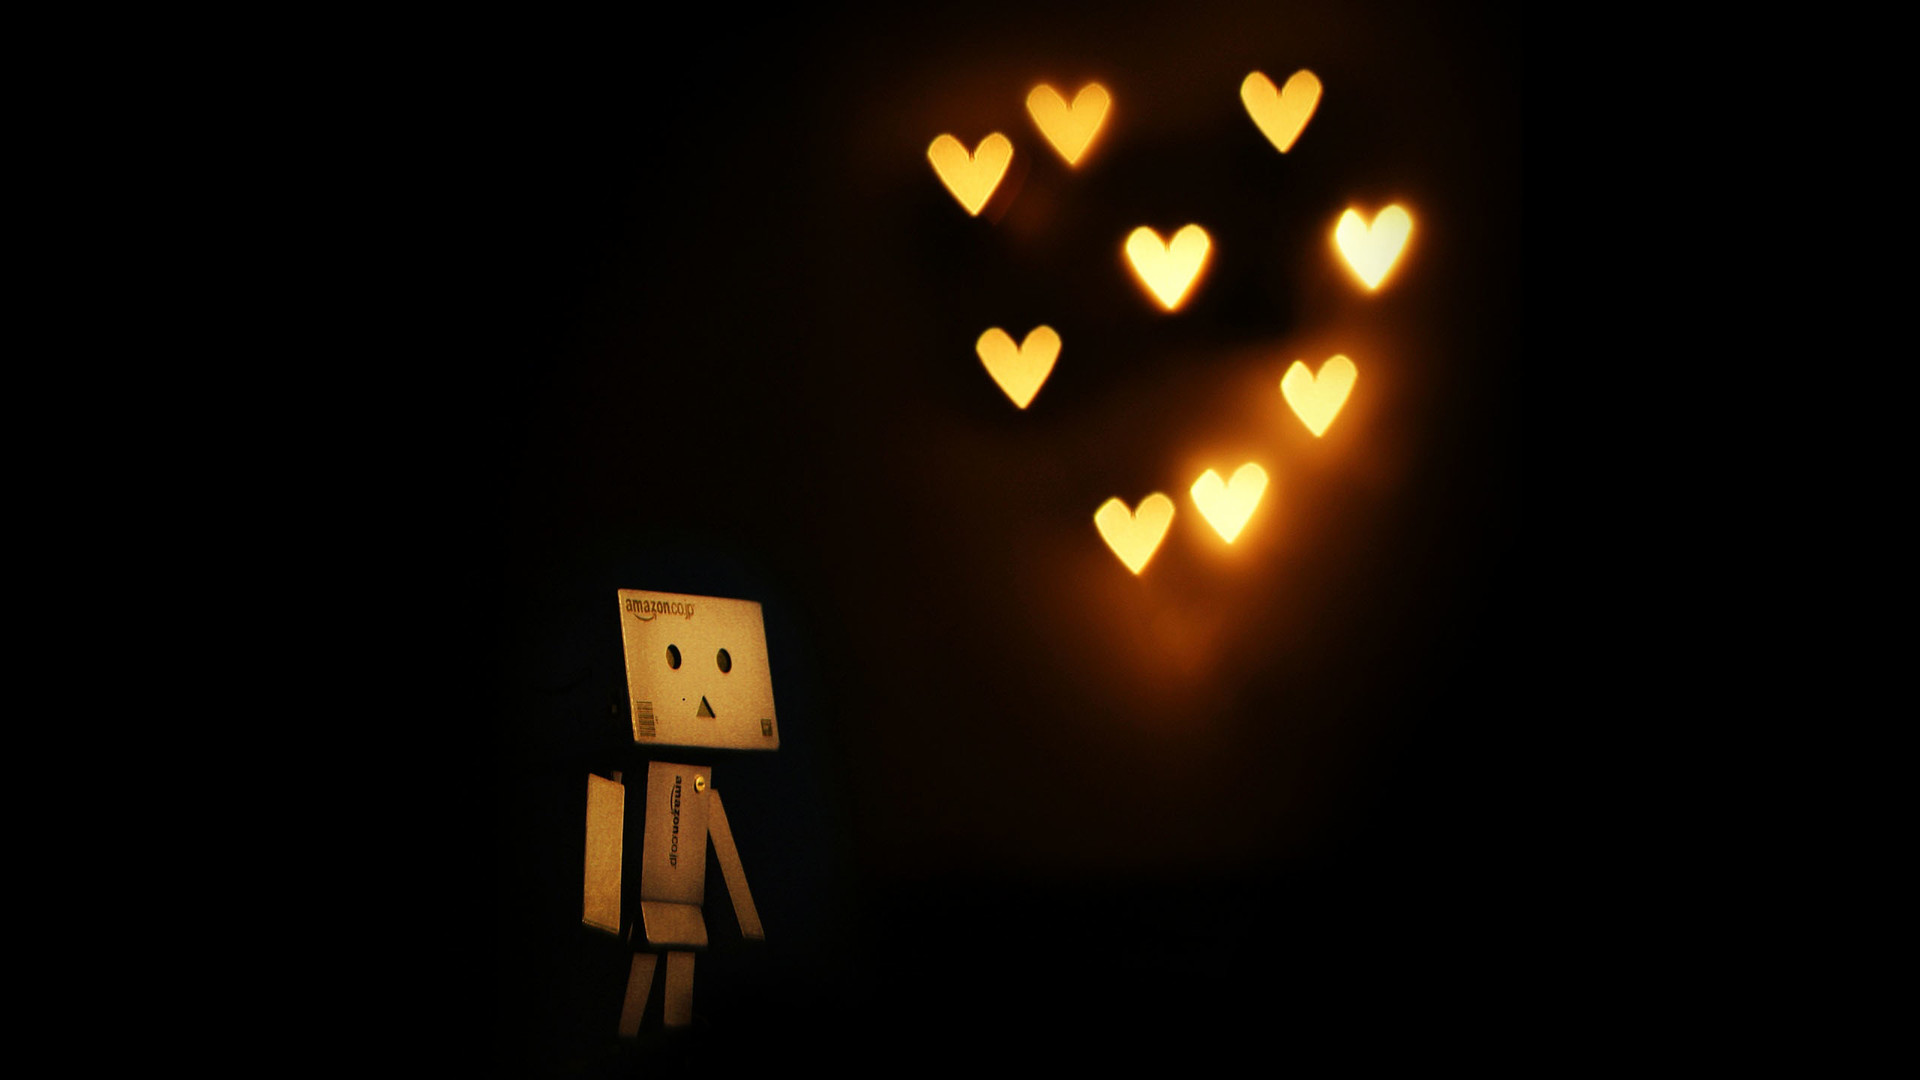 Cardboard Robot Is Dreaming At Hearts